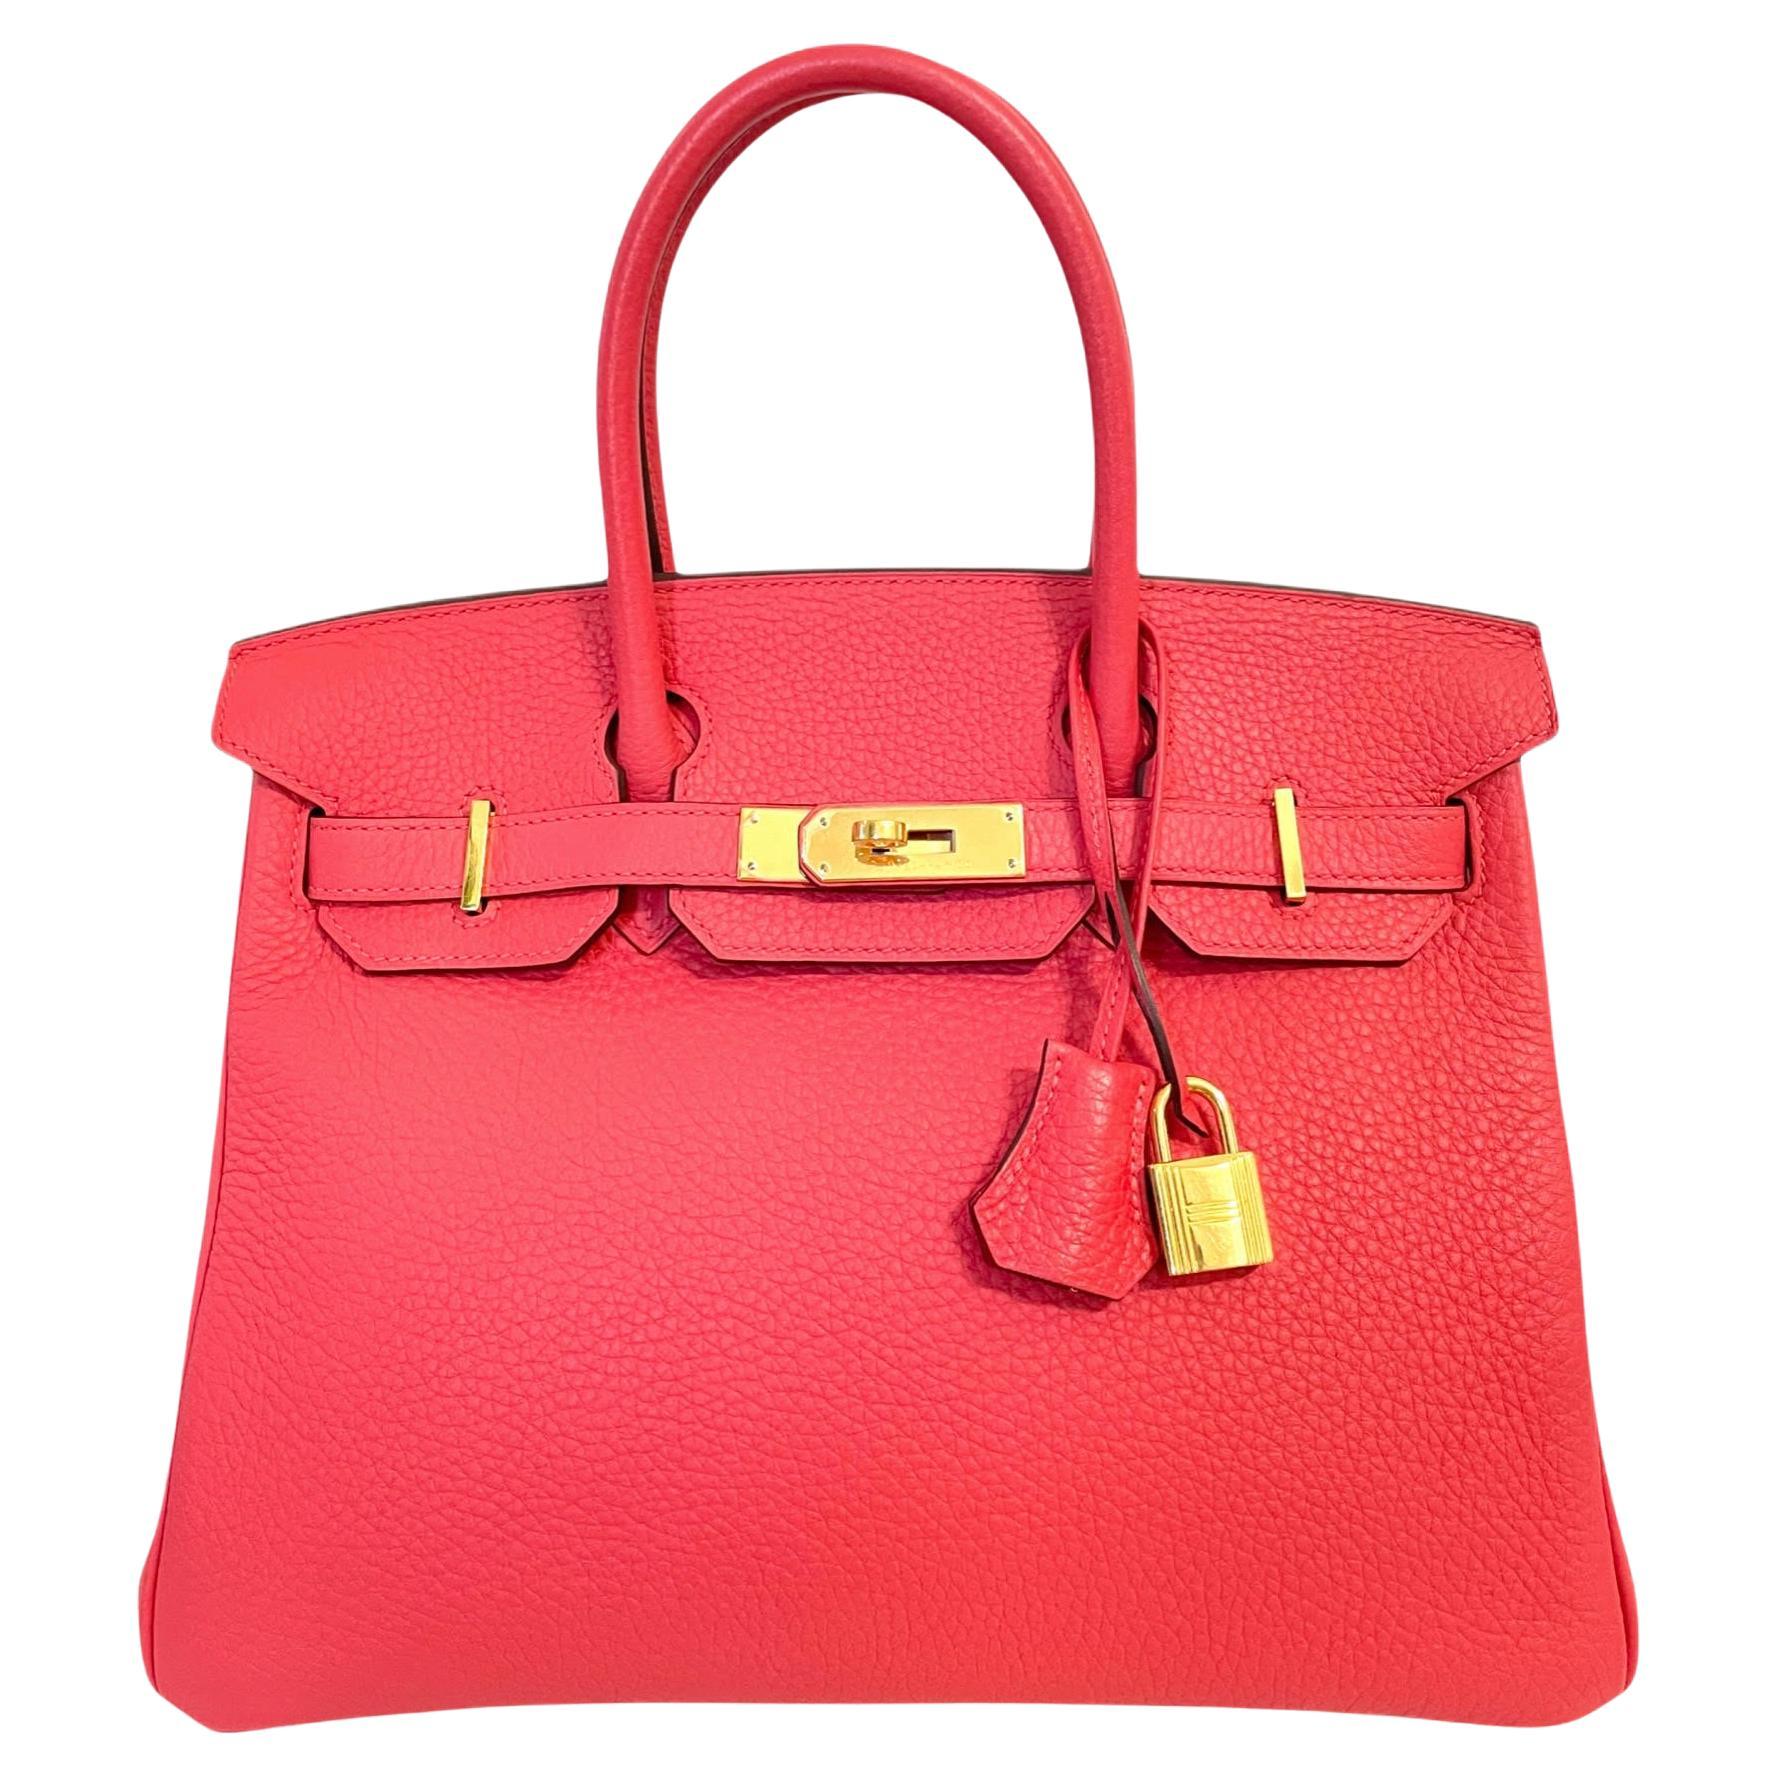 Sold at Auction: HERMES BIRKIN HAC 50 ROUGE LEATHER LARGE TOTE BAG